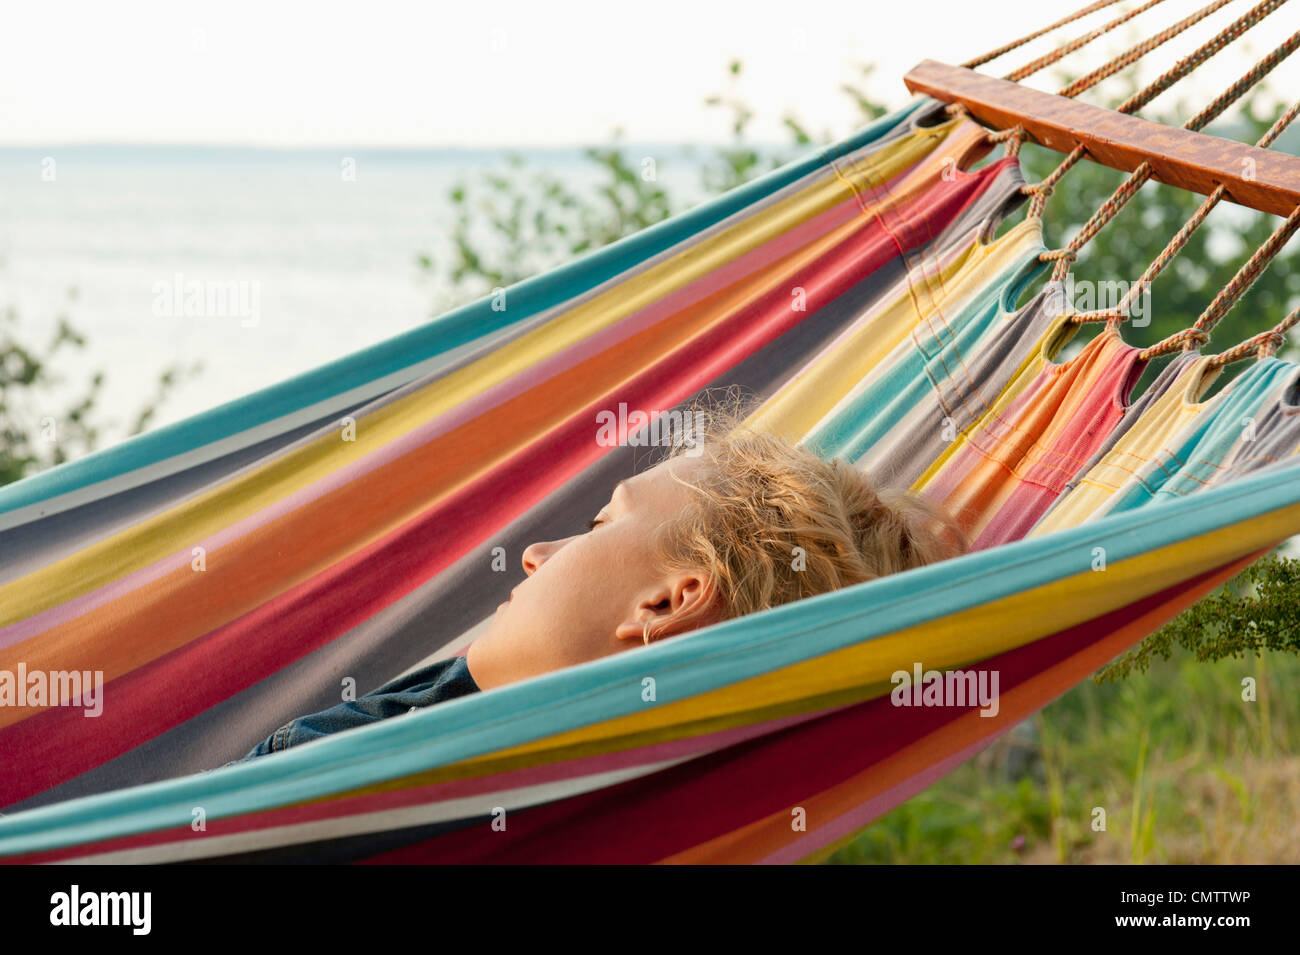 Woman sleeping in hammock Banque D'Images